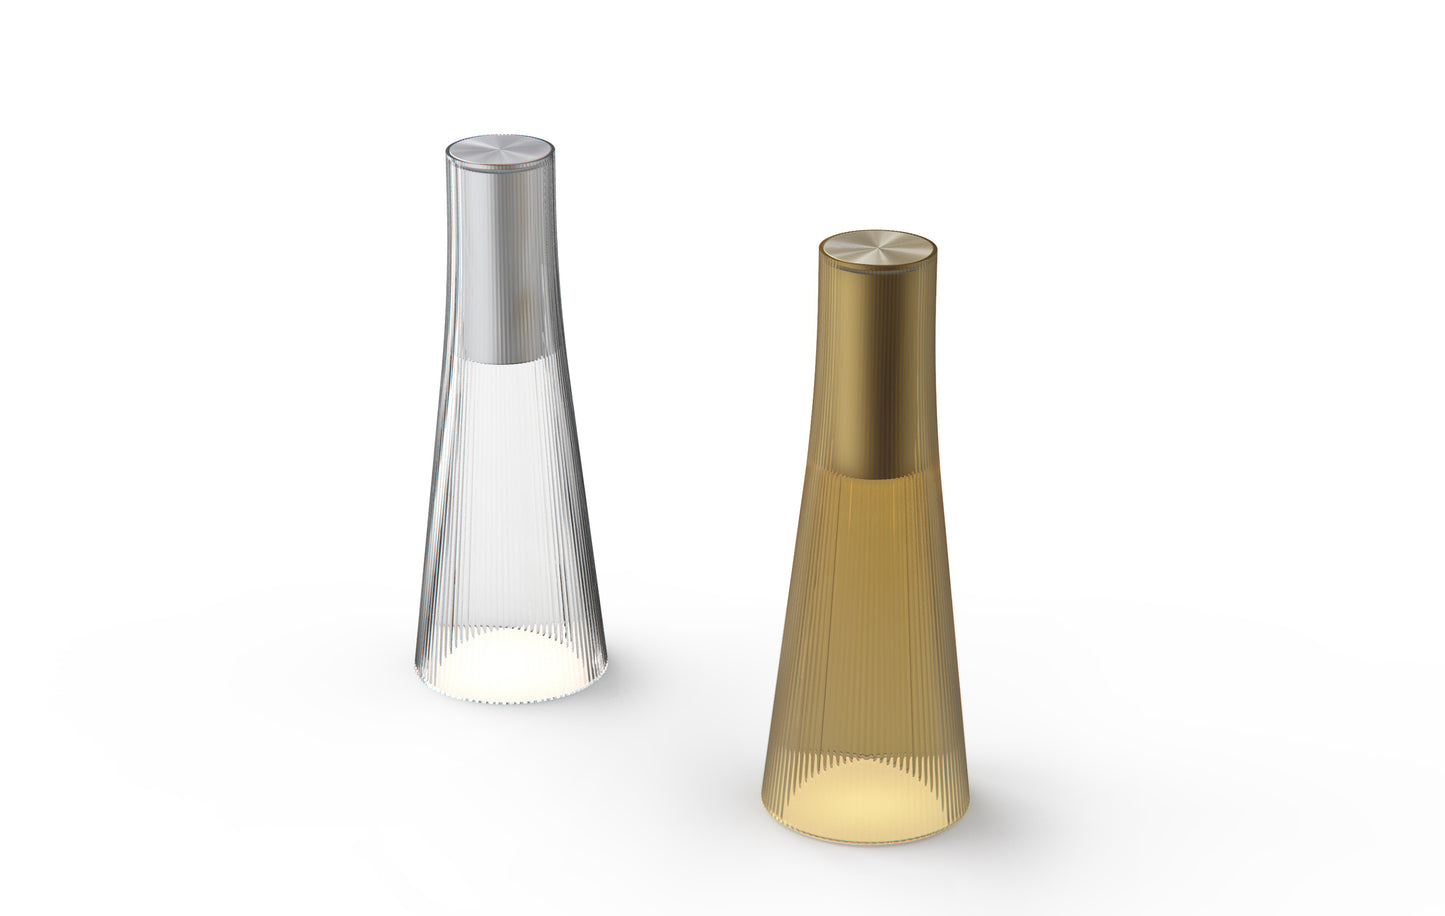 Candel Portable Lamp by Pablo Designs